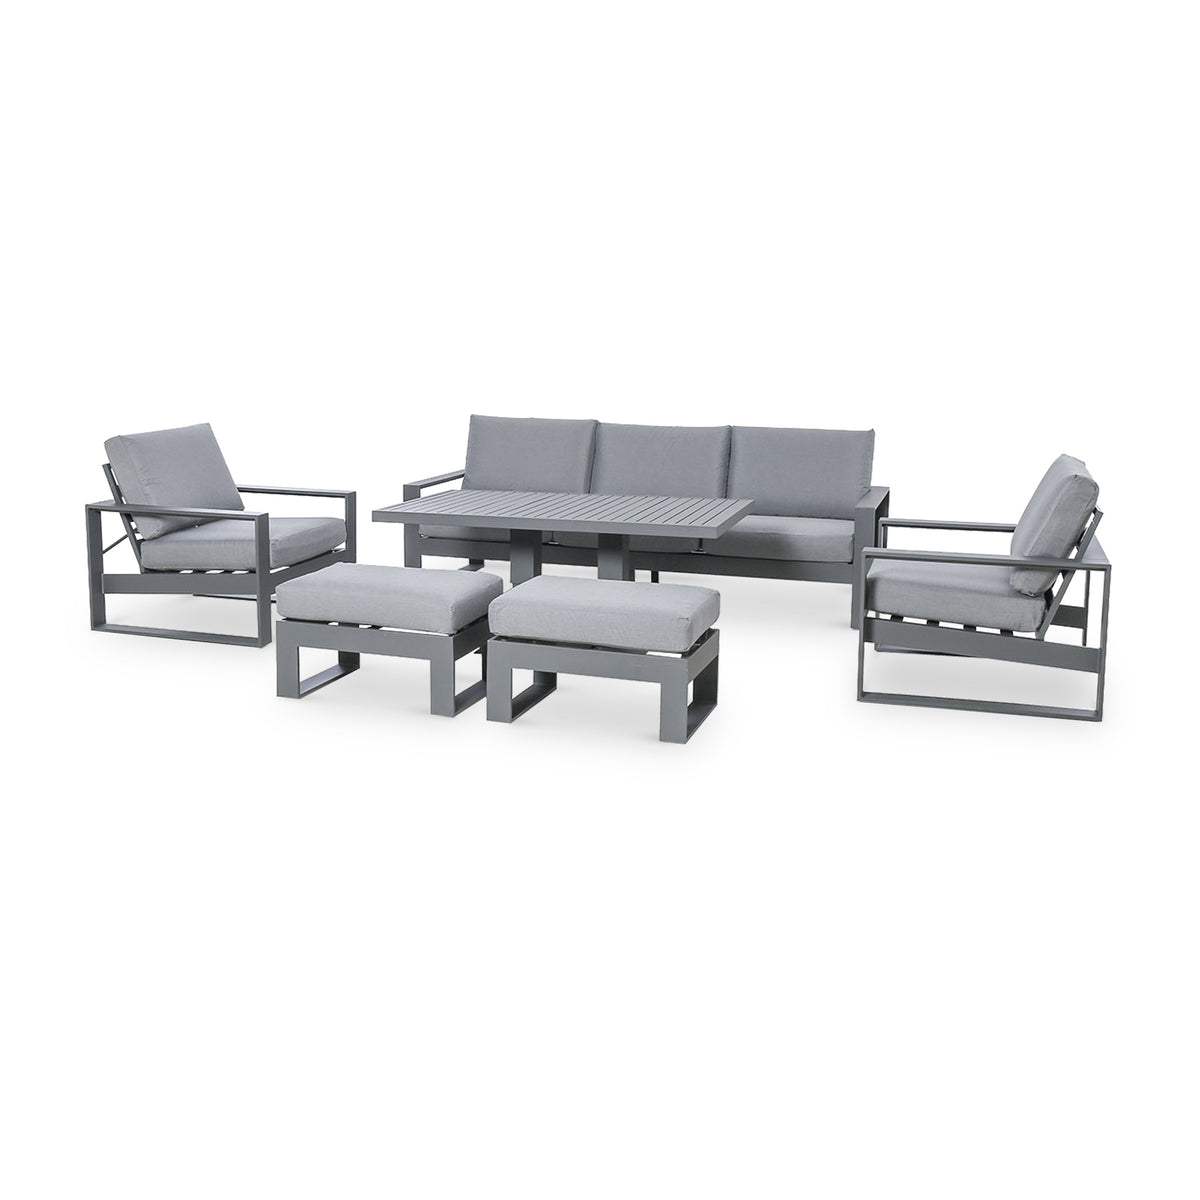 Amalfi Grey 3 Seat Sofa Set With Rising Table from Roseland Furniture